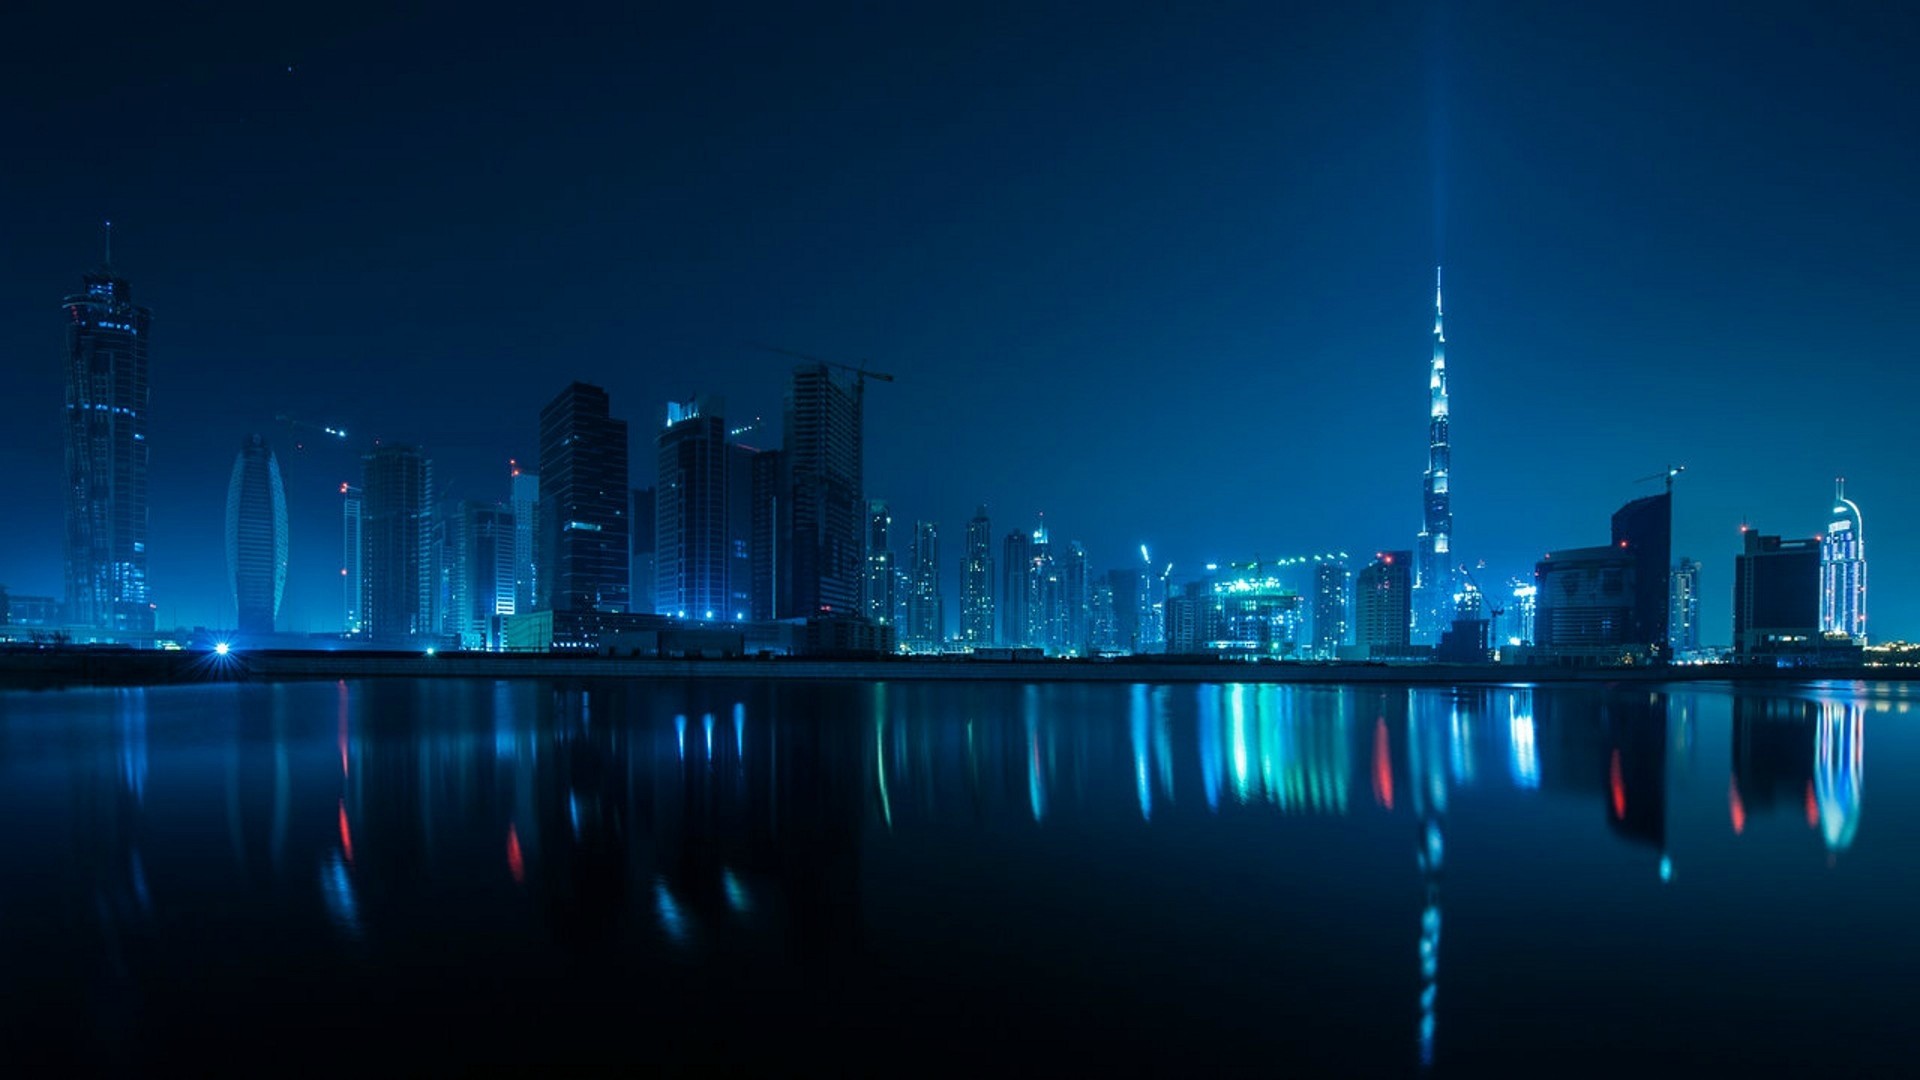 The 9 Most Beautiful Cities in the World at Night - Great Lost